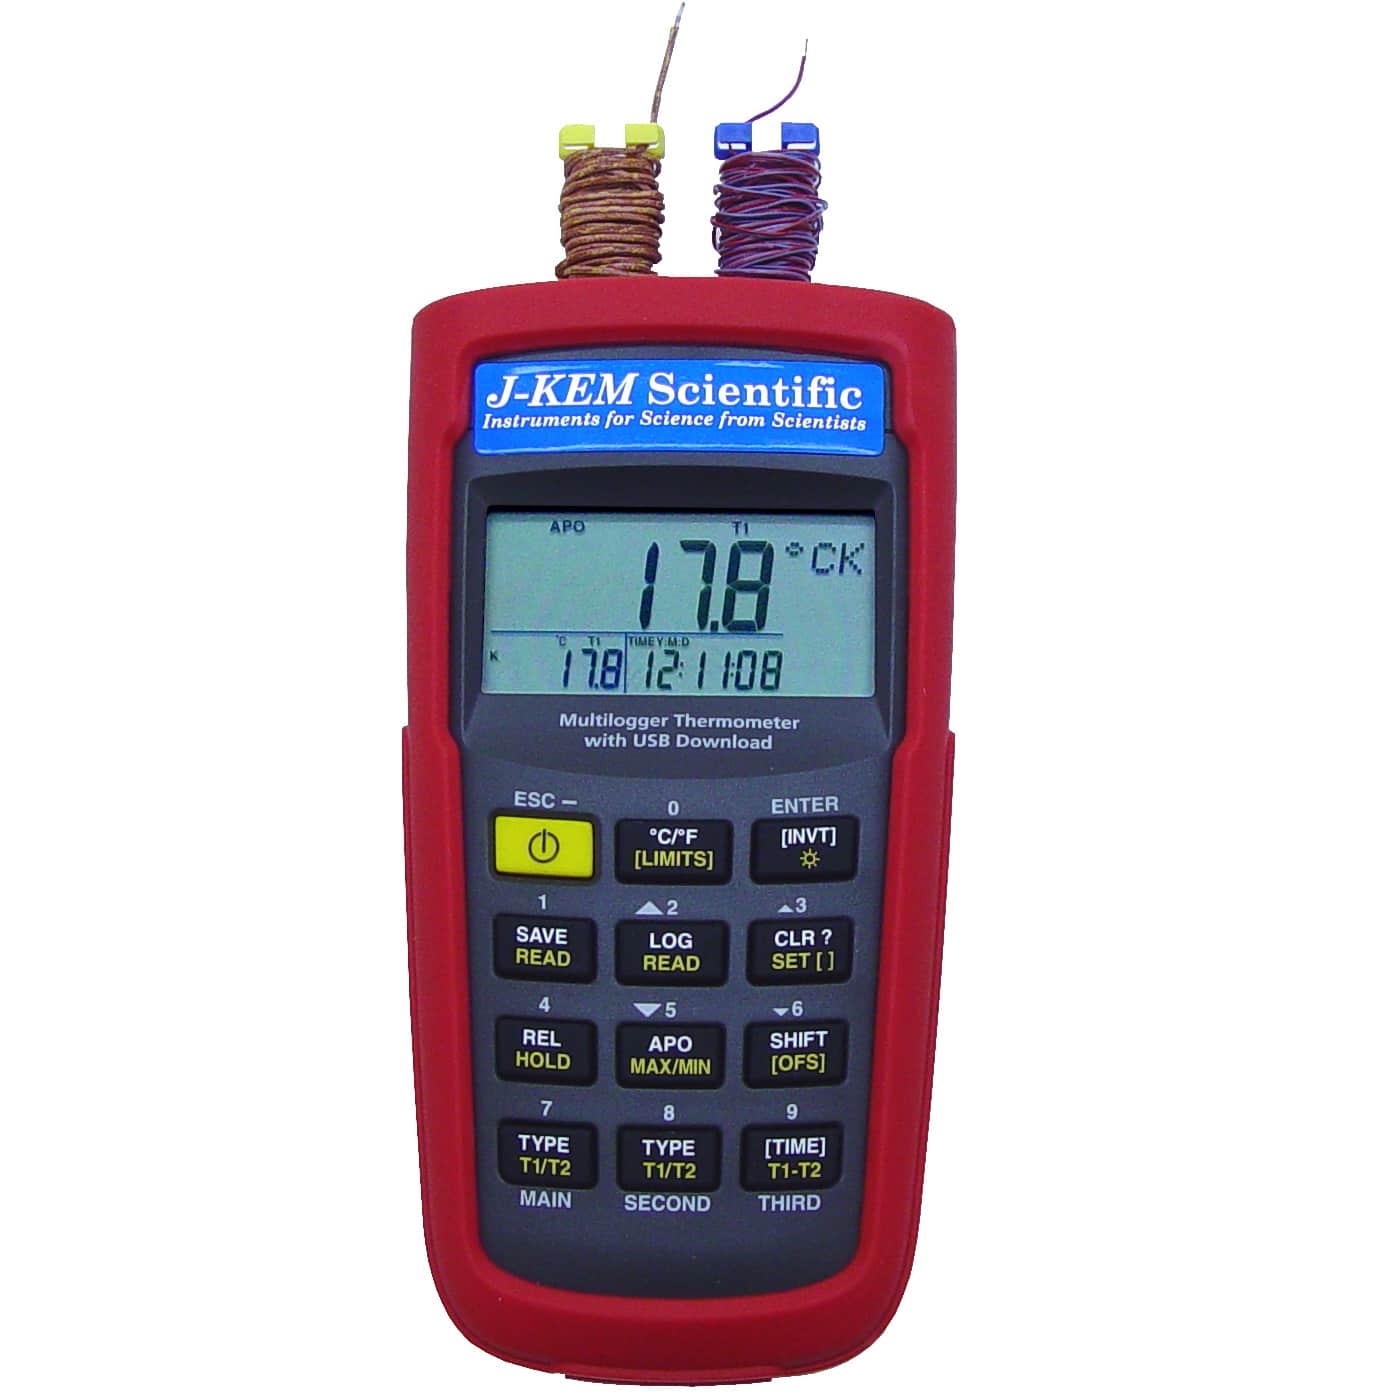 Handheld Thermocouple Meter with Dual Thermocouple Inputs